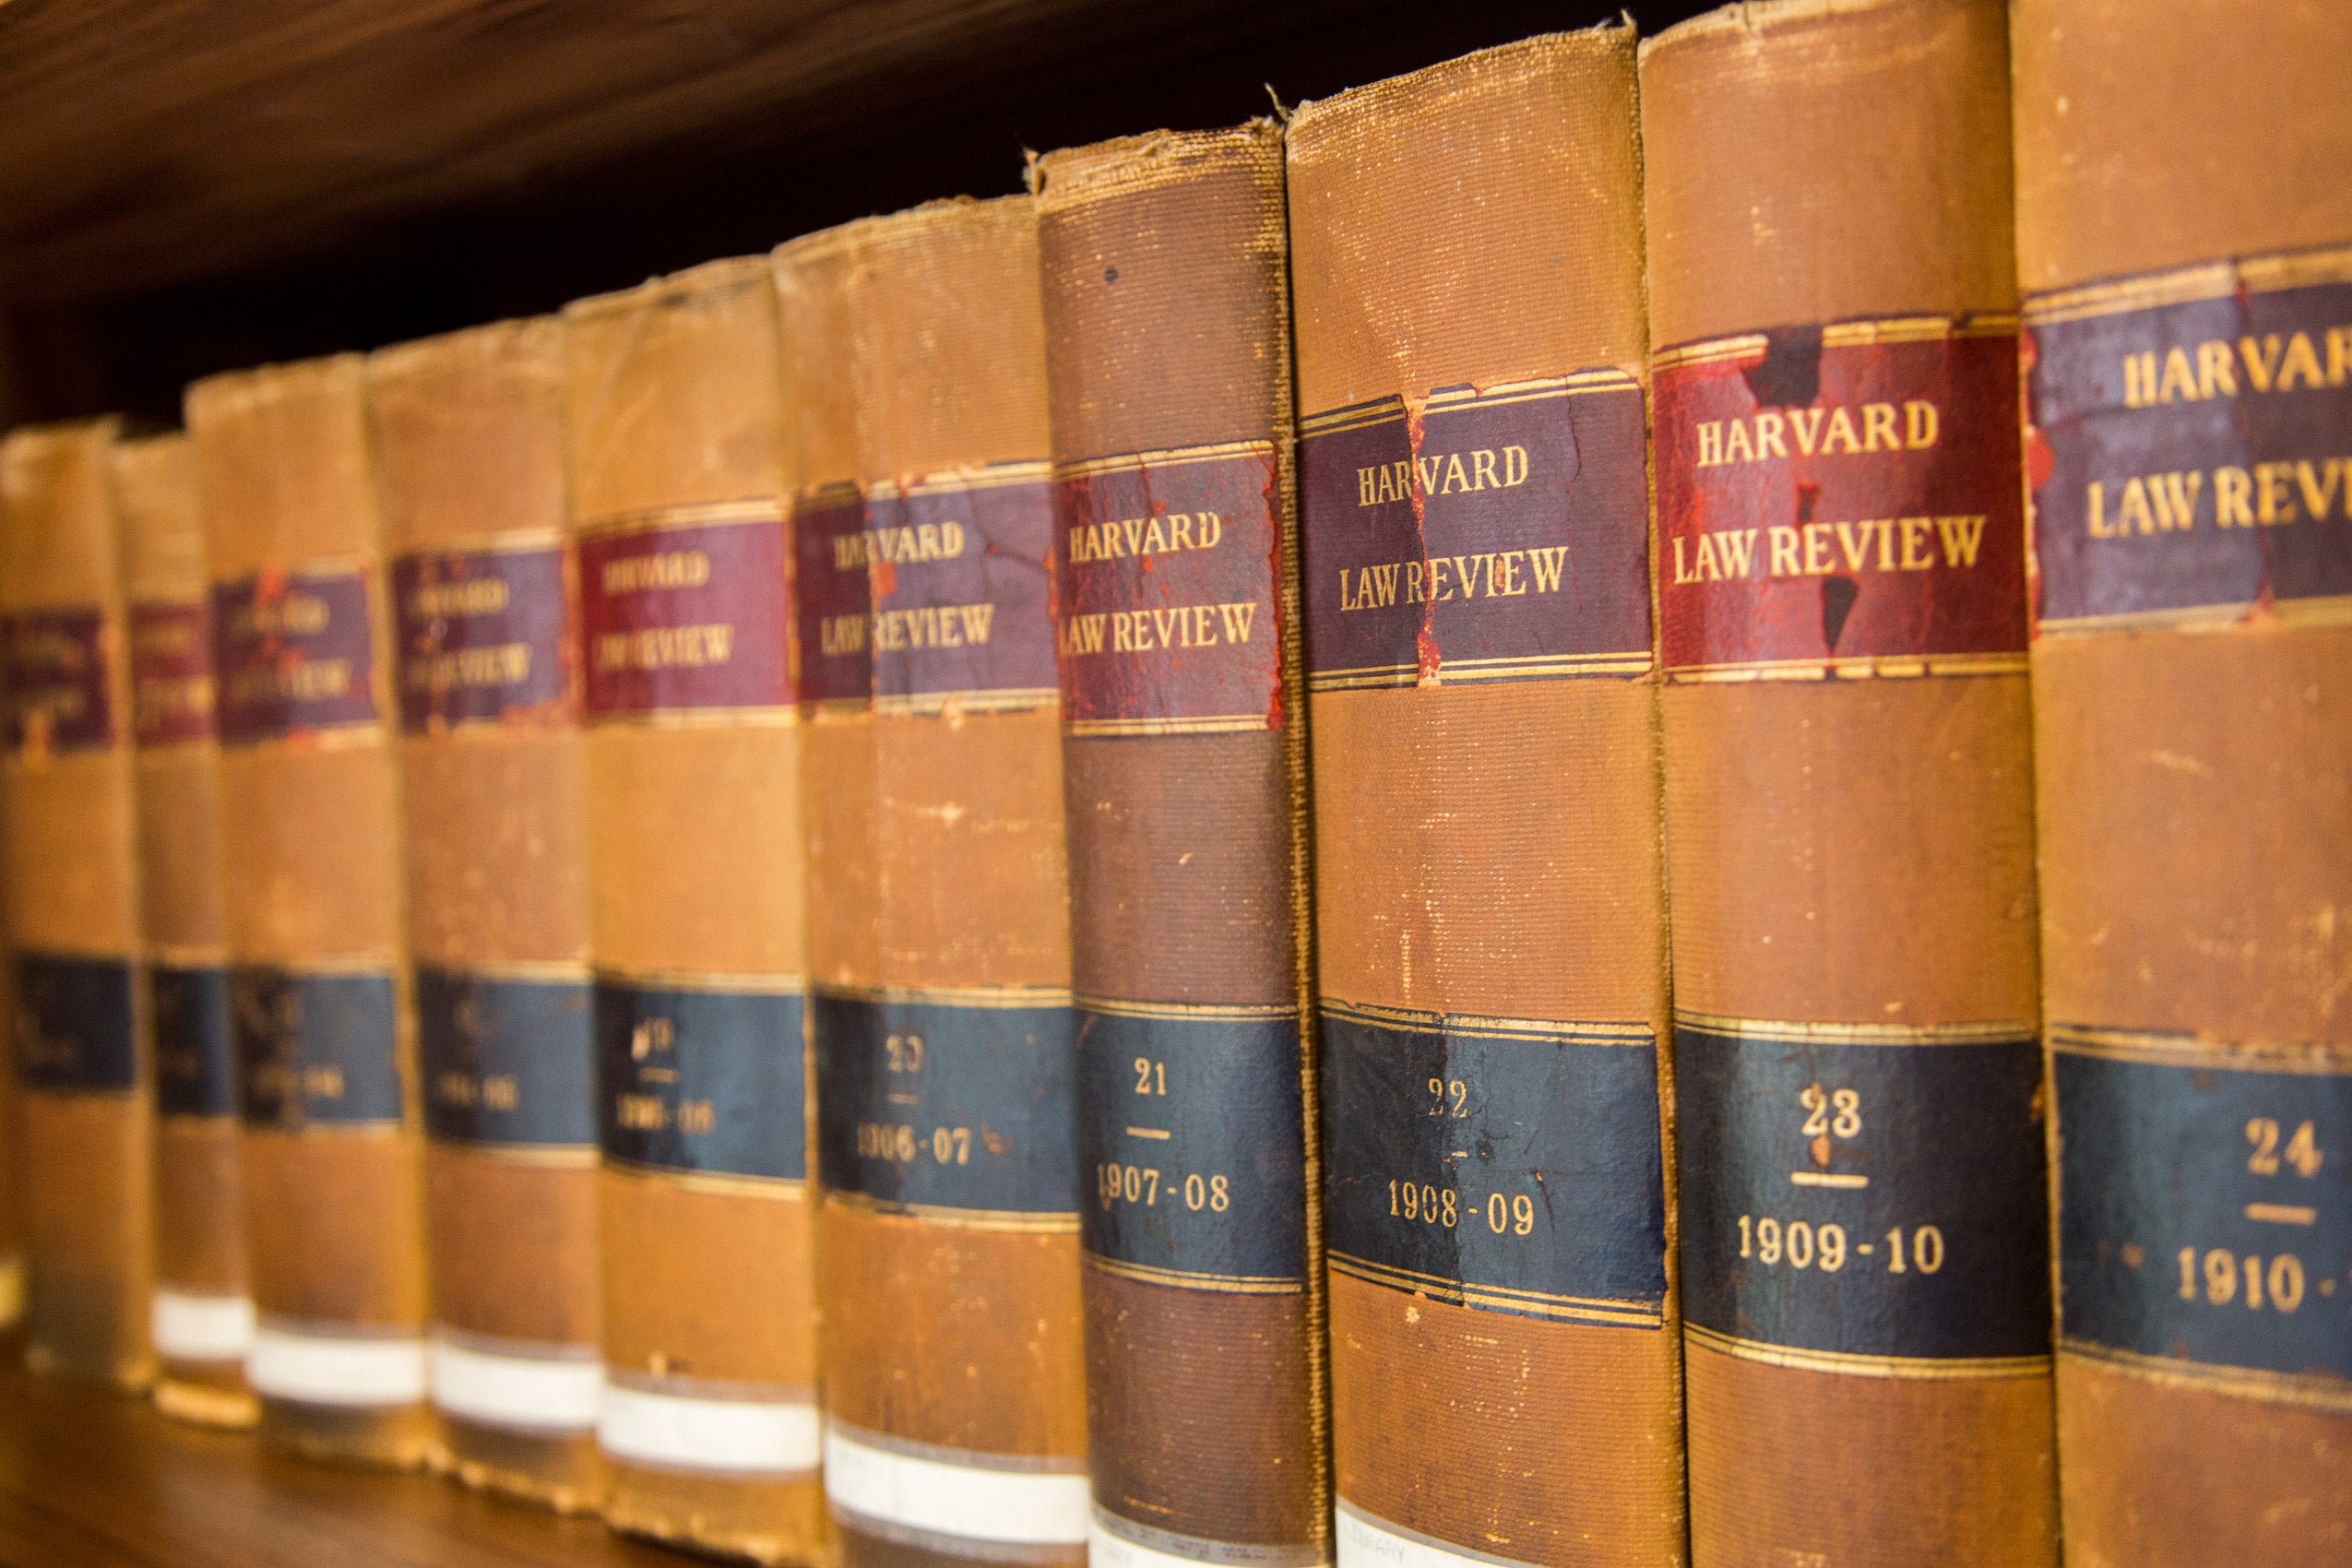 Harvard Law Review releases special bicentennial edition 2